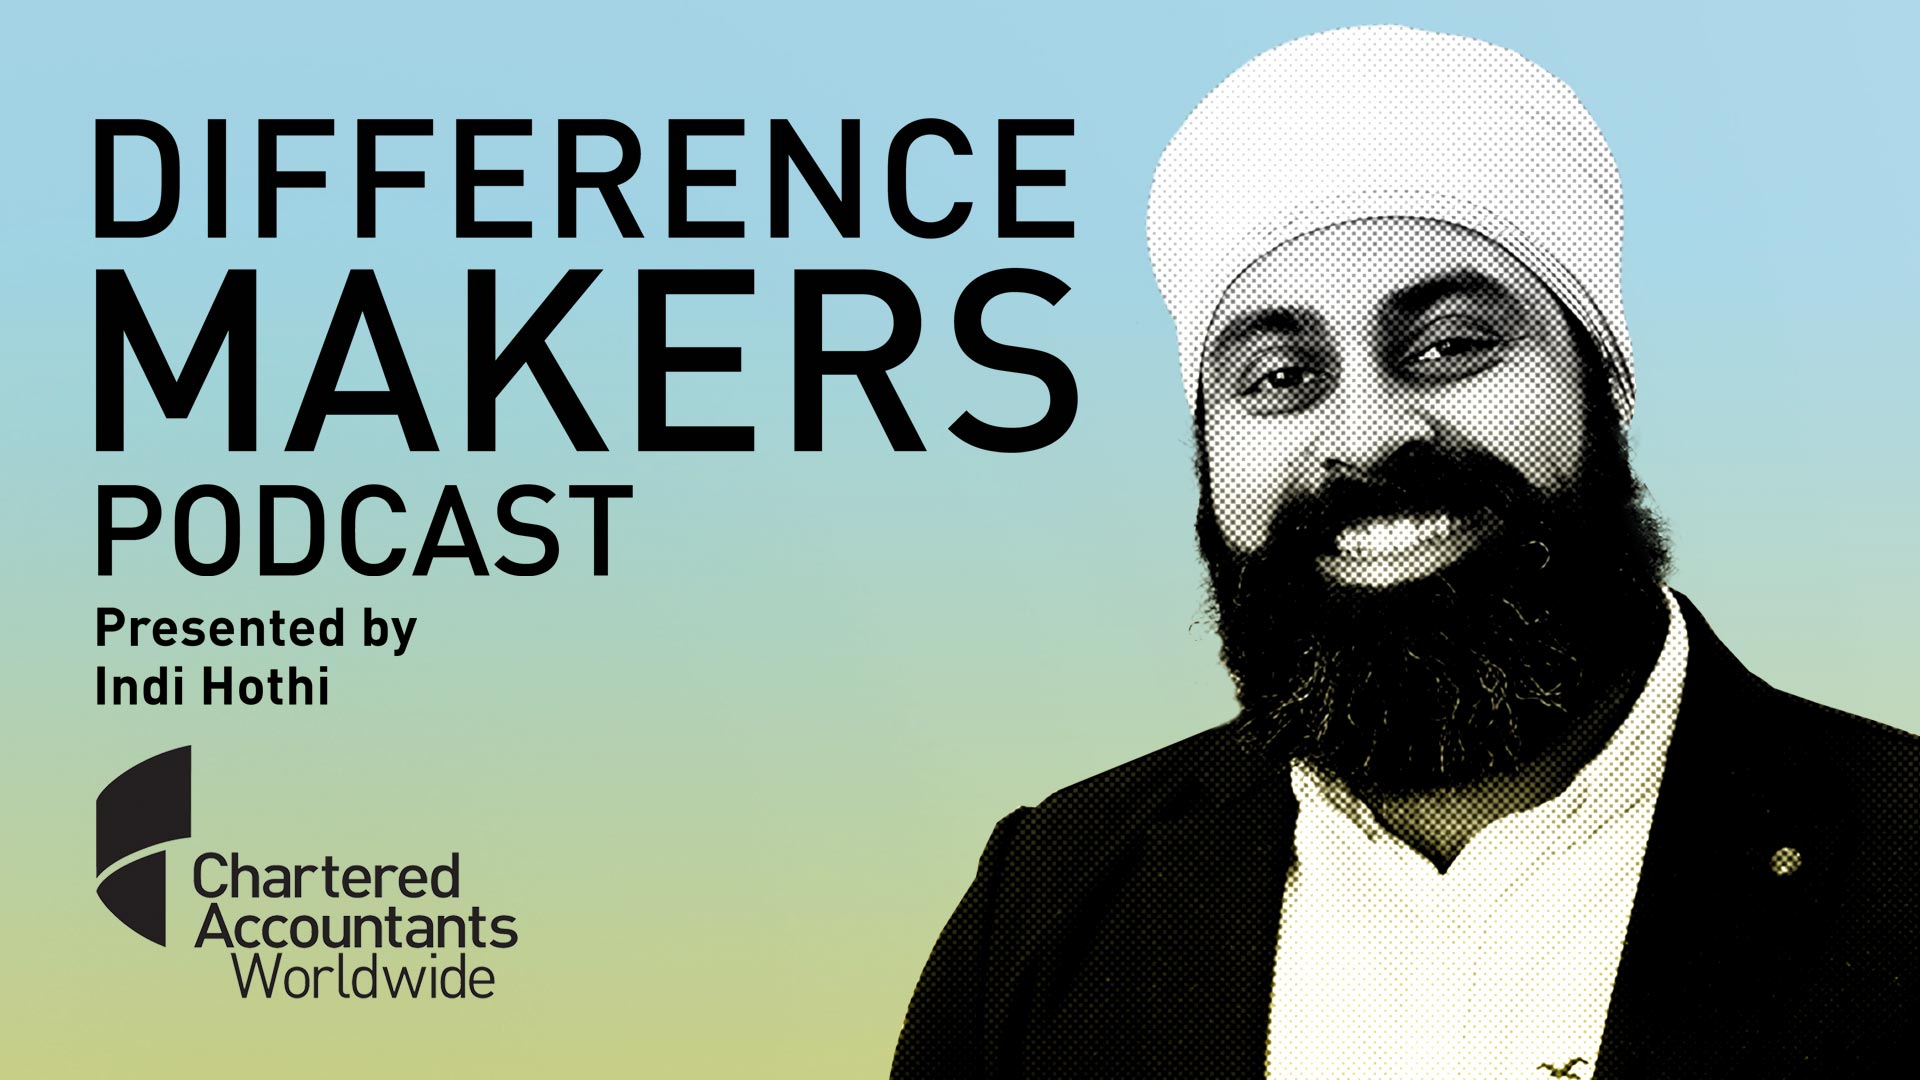 Difference Makers Podcast